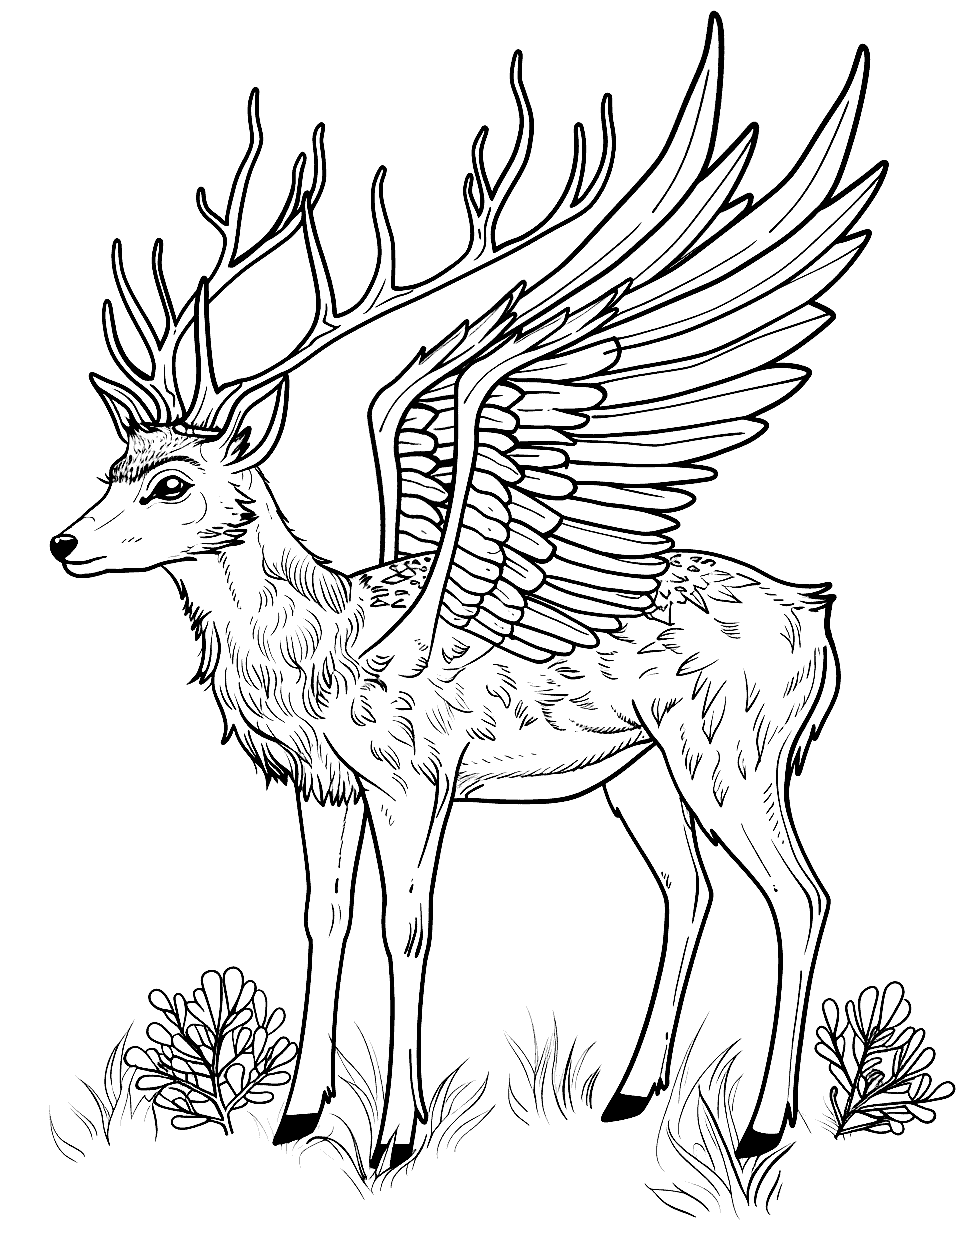 Fantasy Deer with Wings Coloring Page - A mythical scene with a deer that has large, feathery wings.